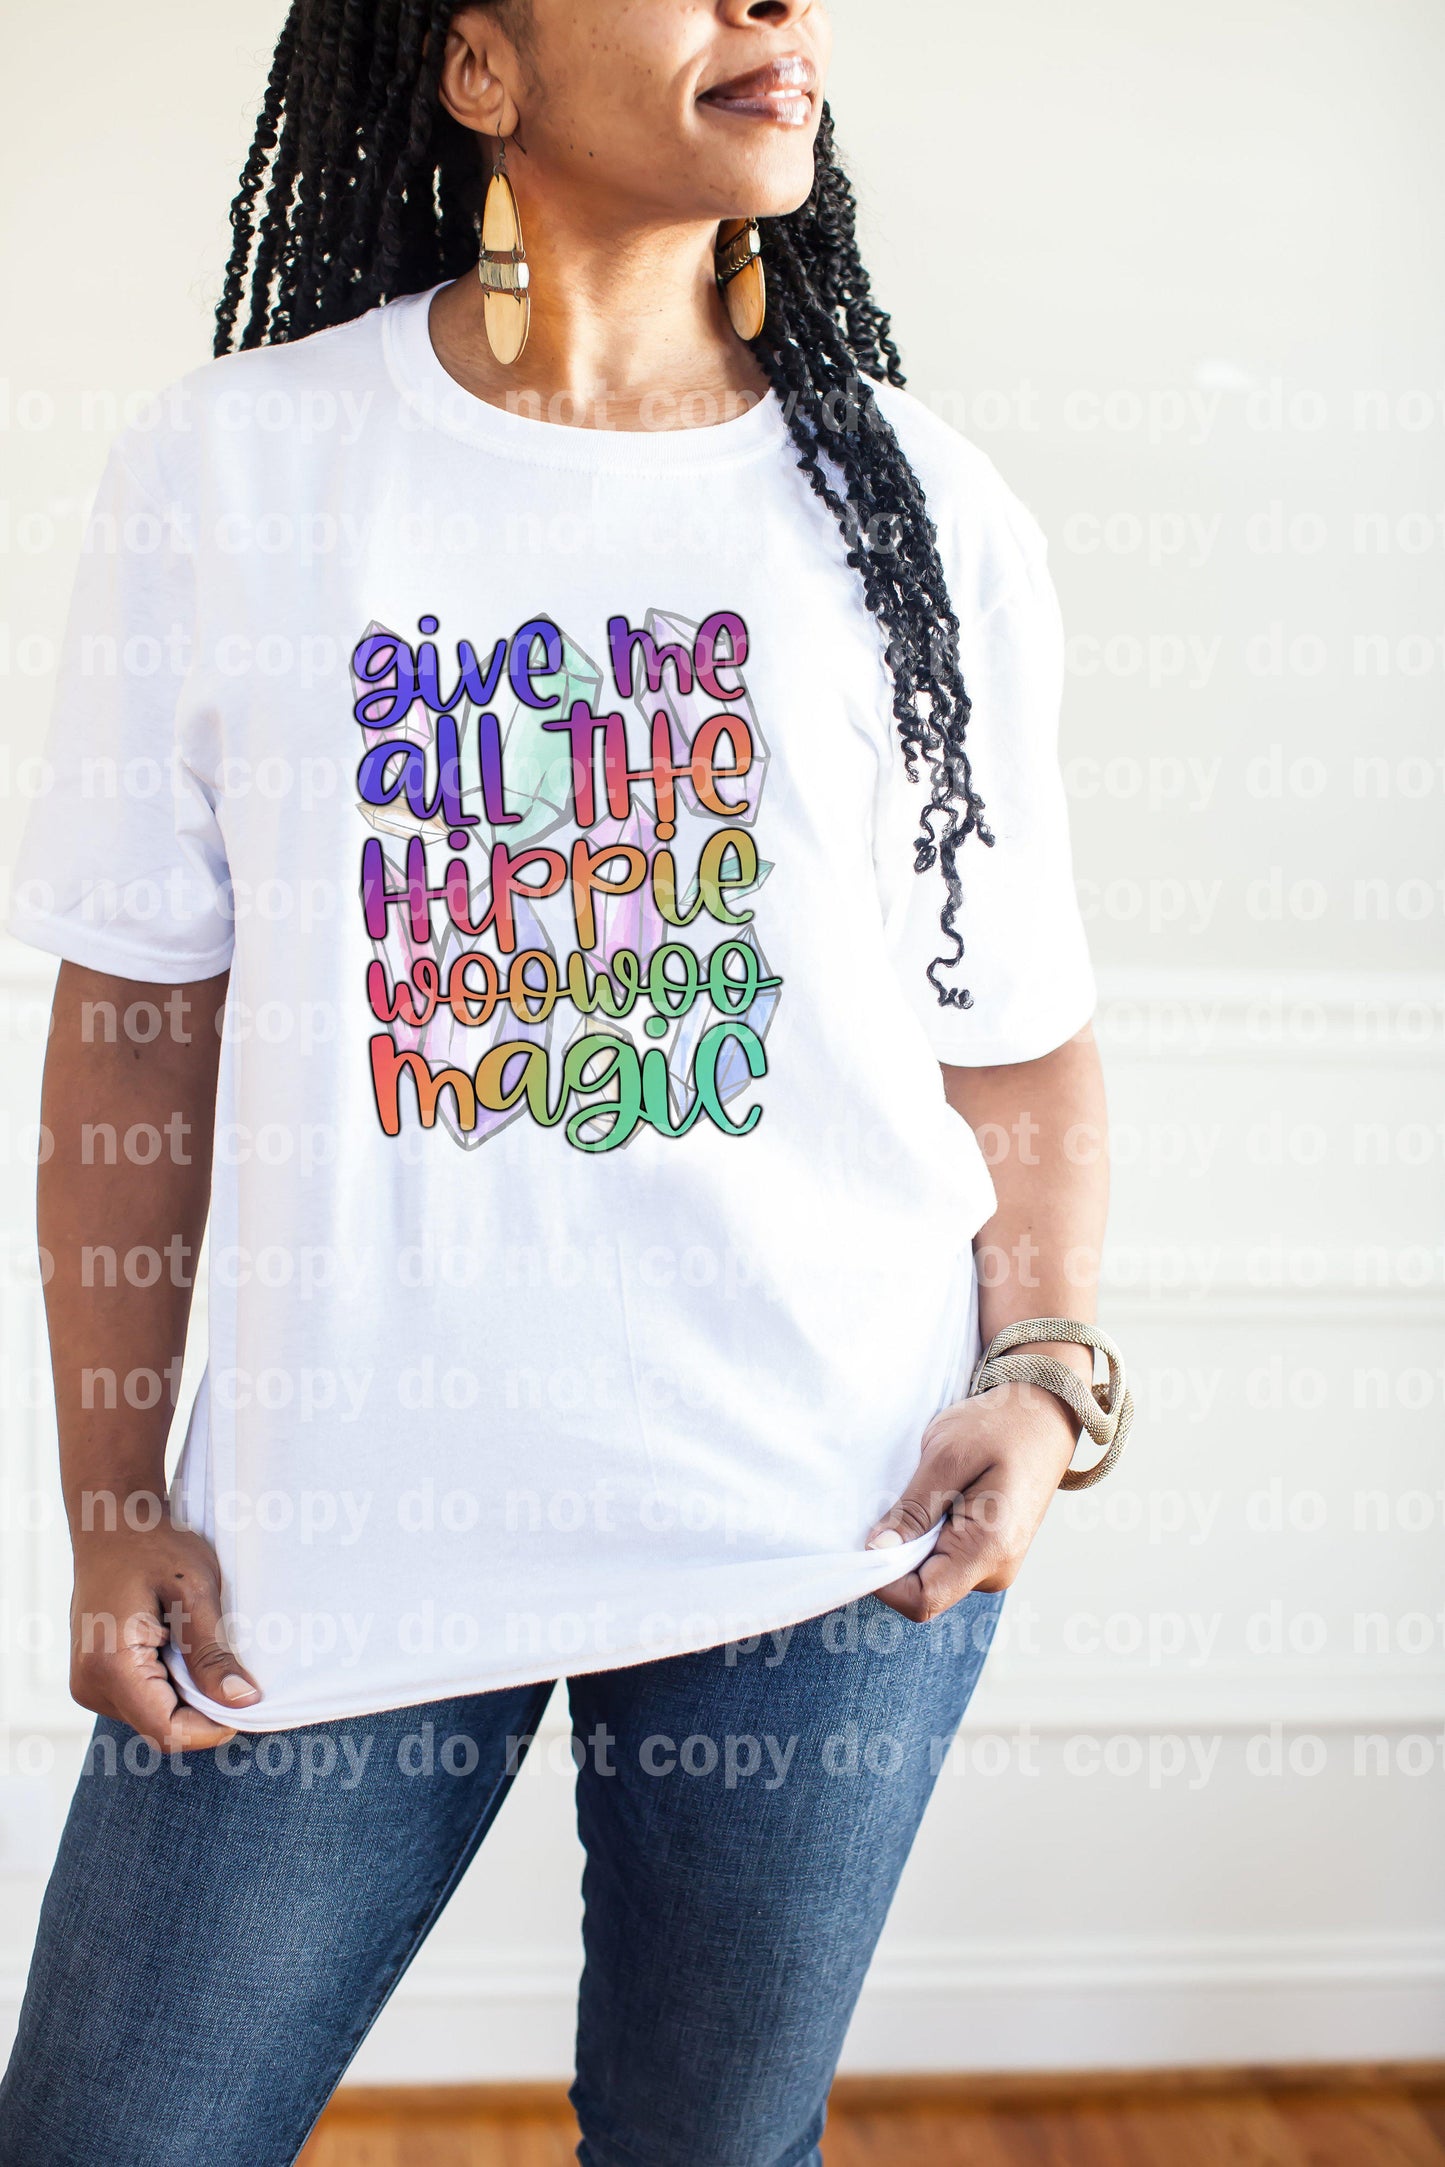 Give me all the hippie woowoo magic Sublimation print